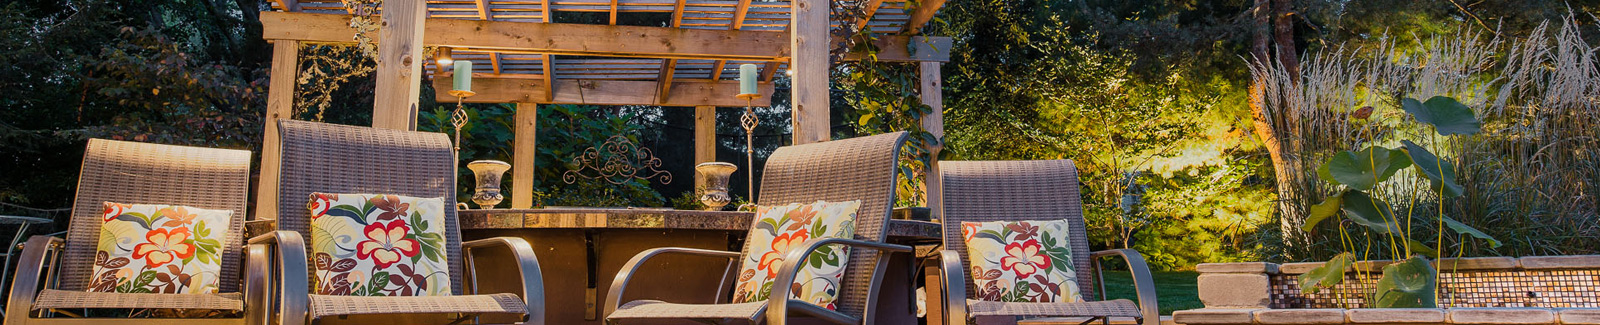 Create a Safe Backyard Retreat for Your Family with the Experts at Heinen